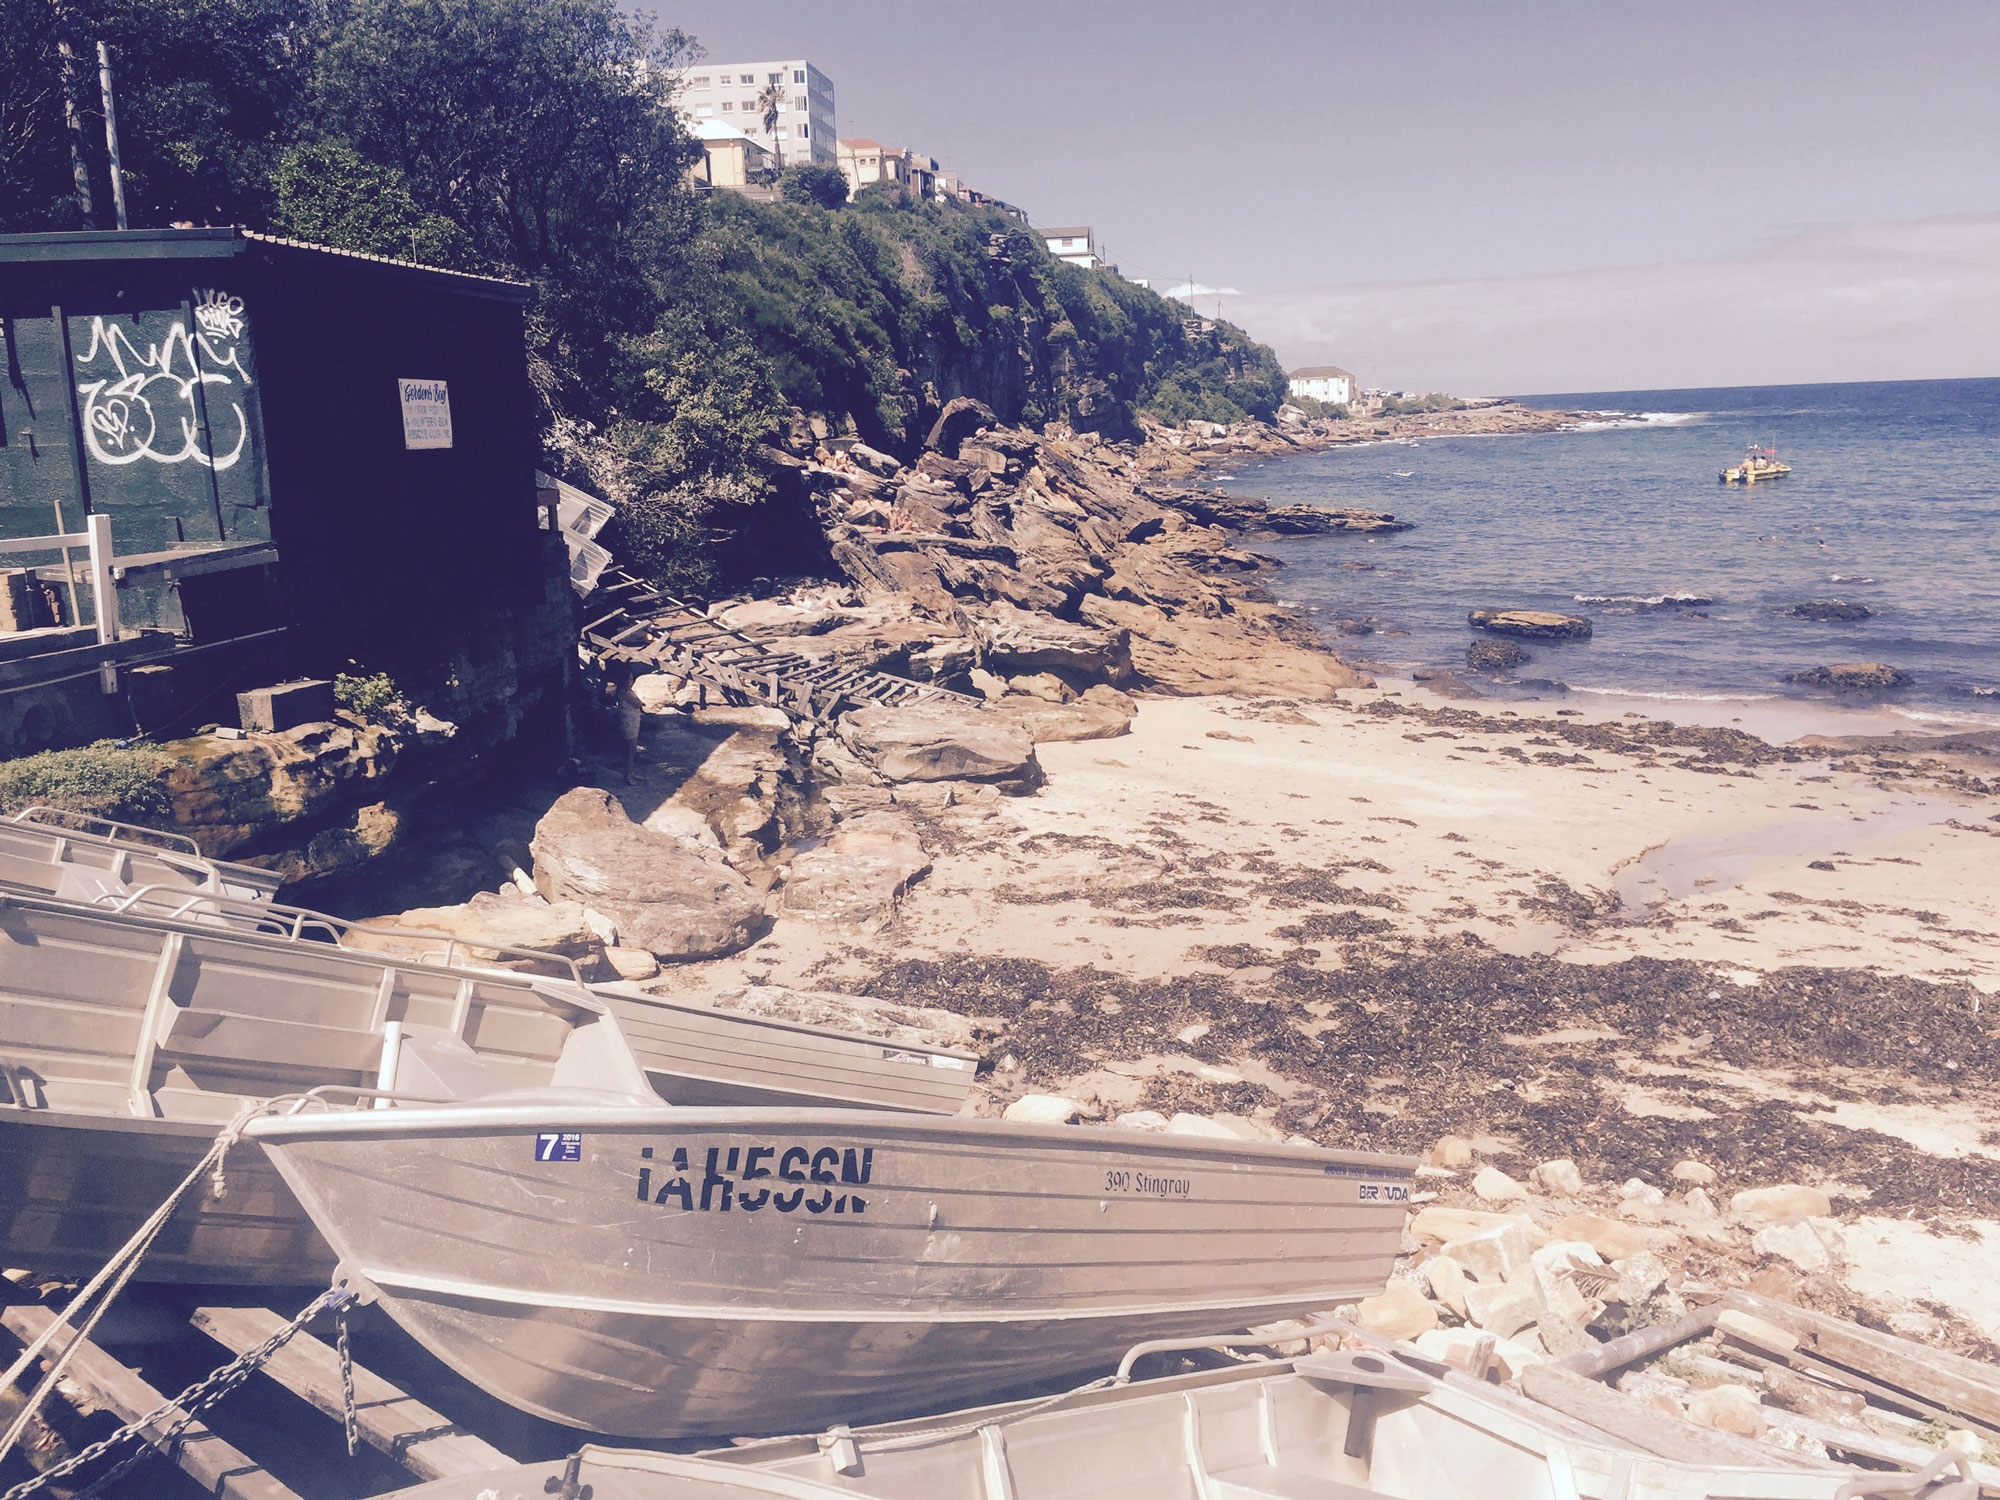 LITTLE BOATS BY GORDONS BAY, MAY 16 